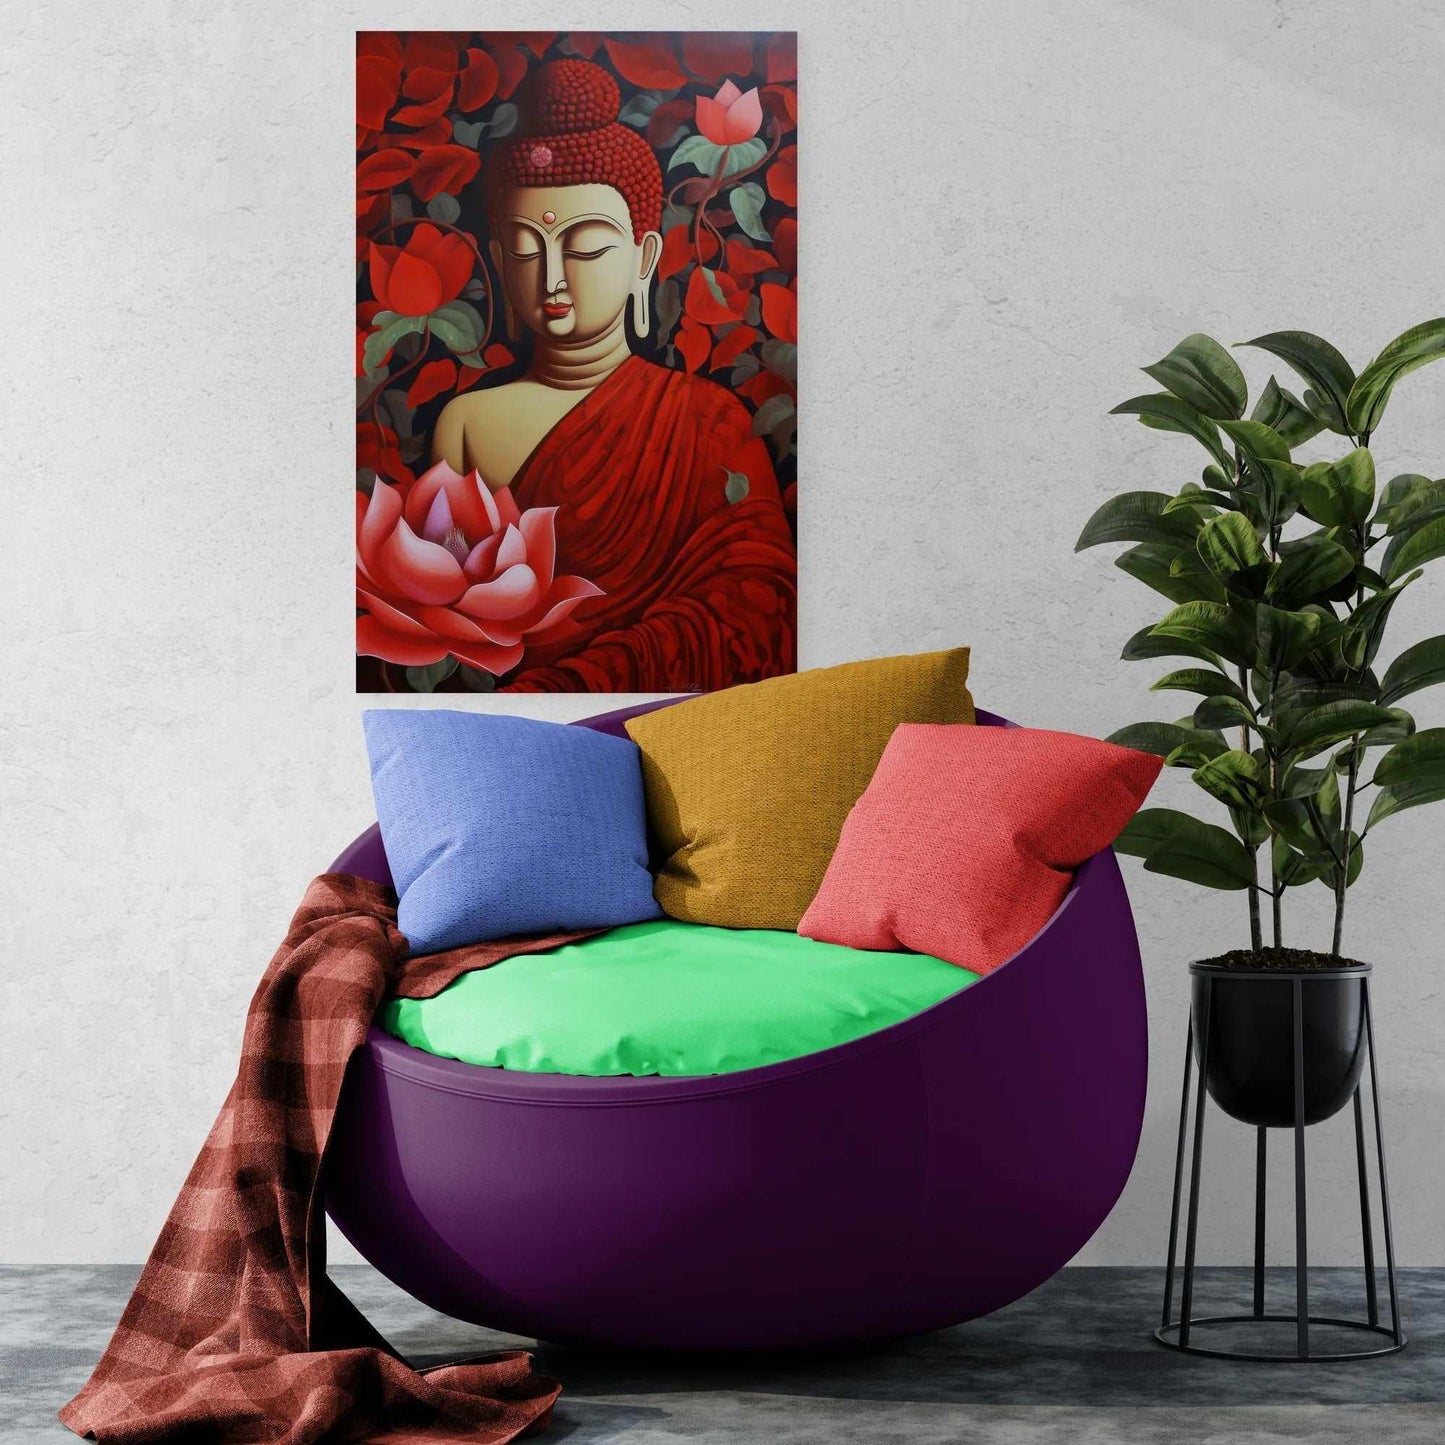 A red Buddha painting with a blooming lotus, placed above a vibrant round chair with colorful pillows, beside a potted plant, creating a lively and spirited corner.